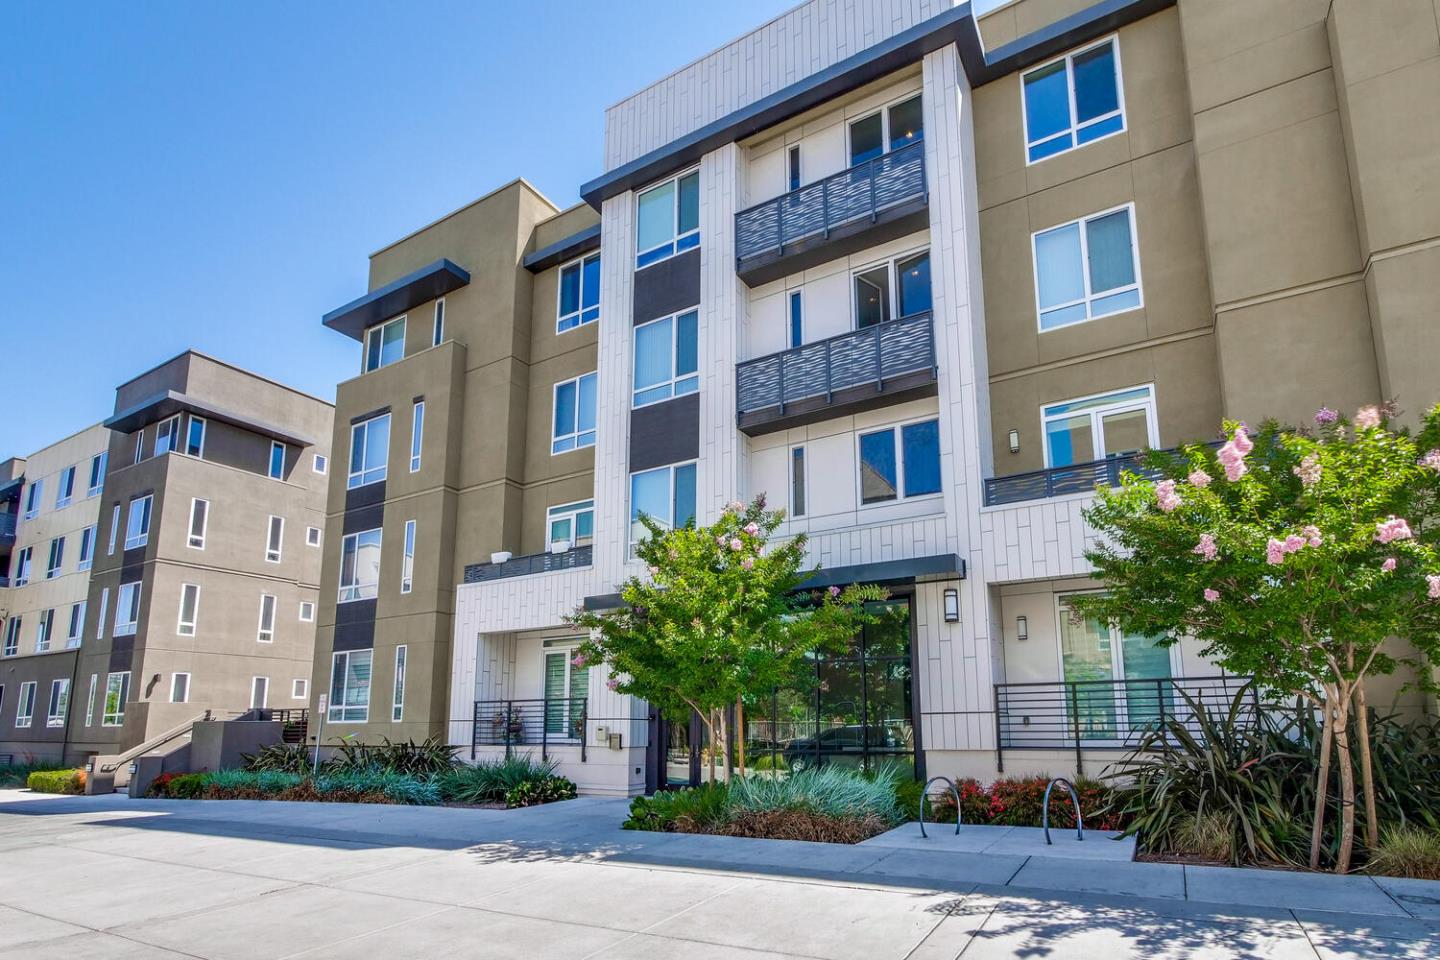 Condos, Lofts and Townhomes for Sale in New Construction Condos in the East Bay